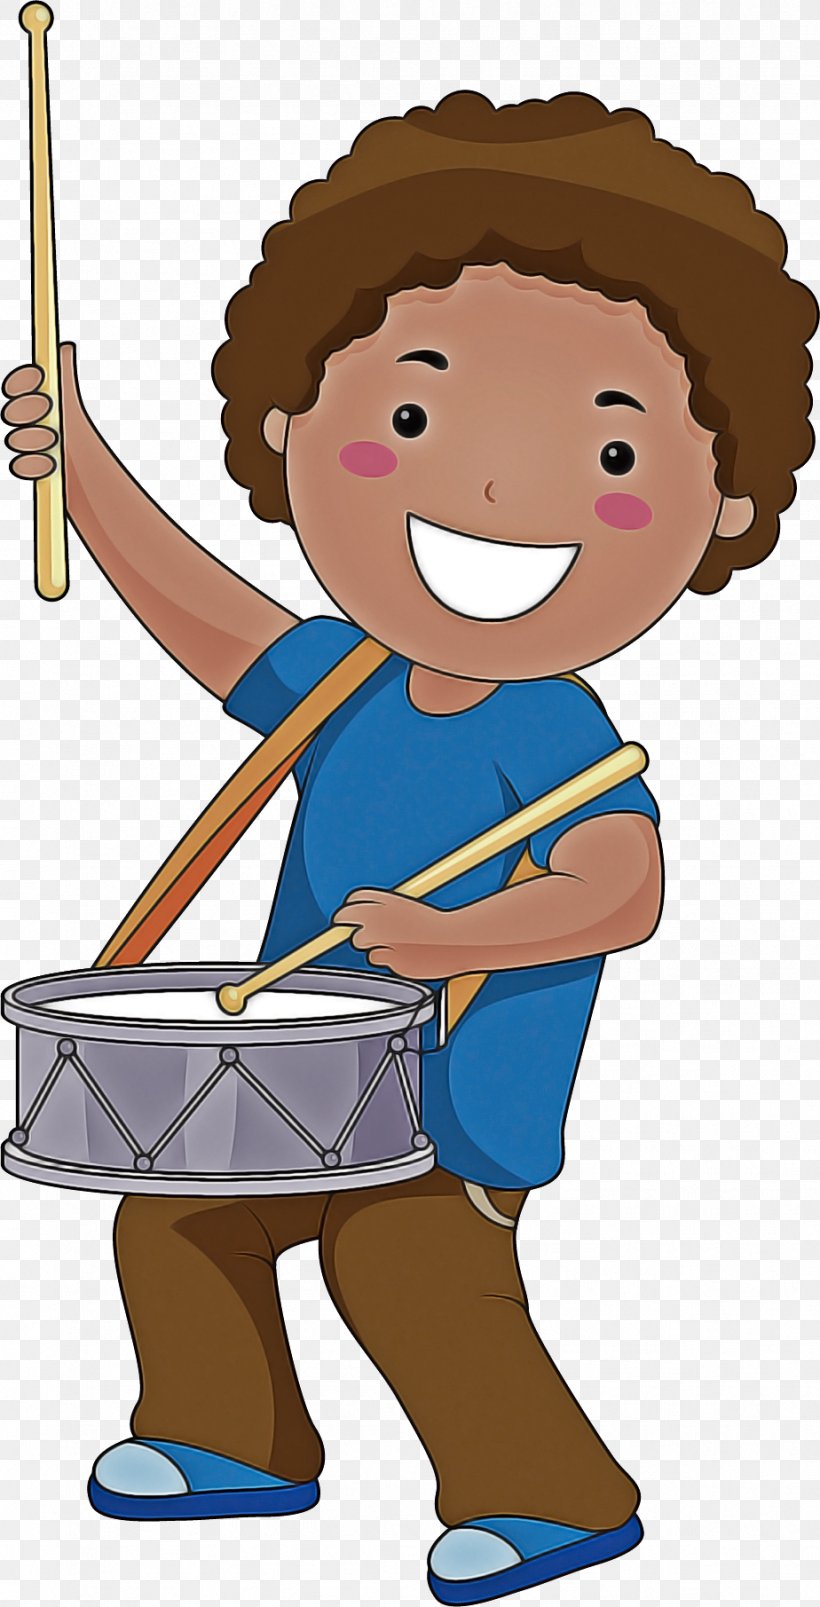 Cartoon Clip Art Drum Marching Percussion Drummer, PNG, 924x1811px, Cartoon, Drum, Drummer, Hand Drum, Marching Percussion Download Free